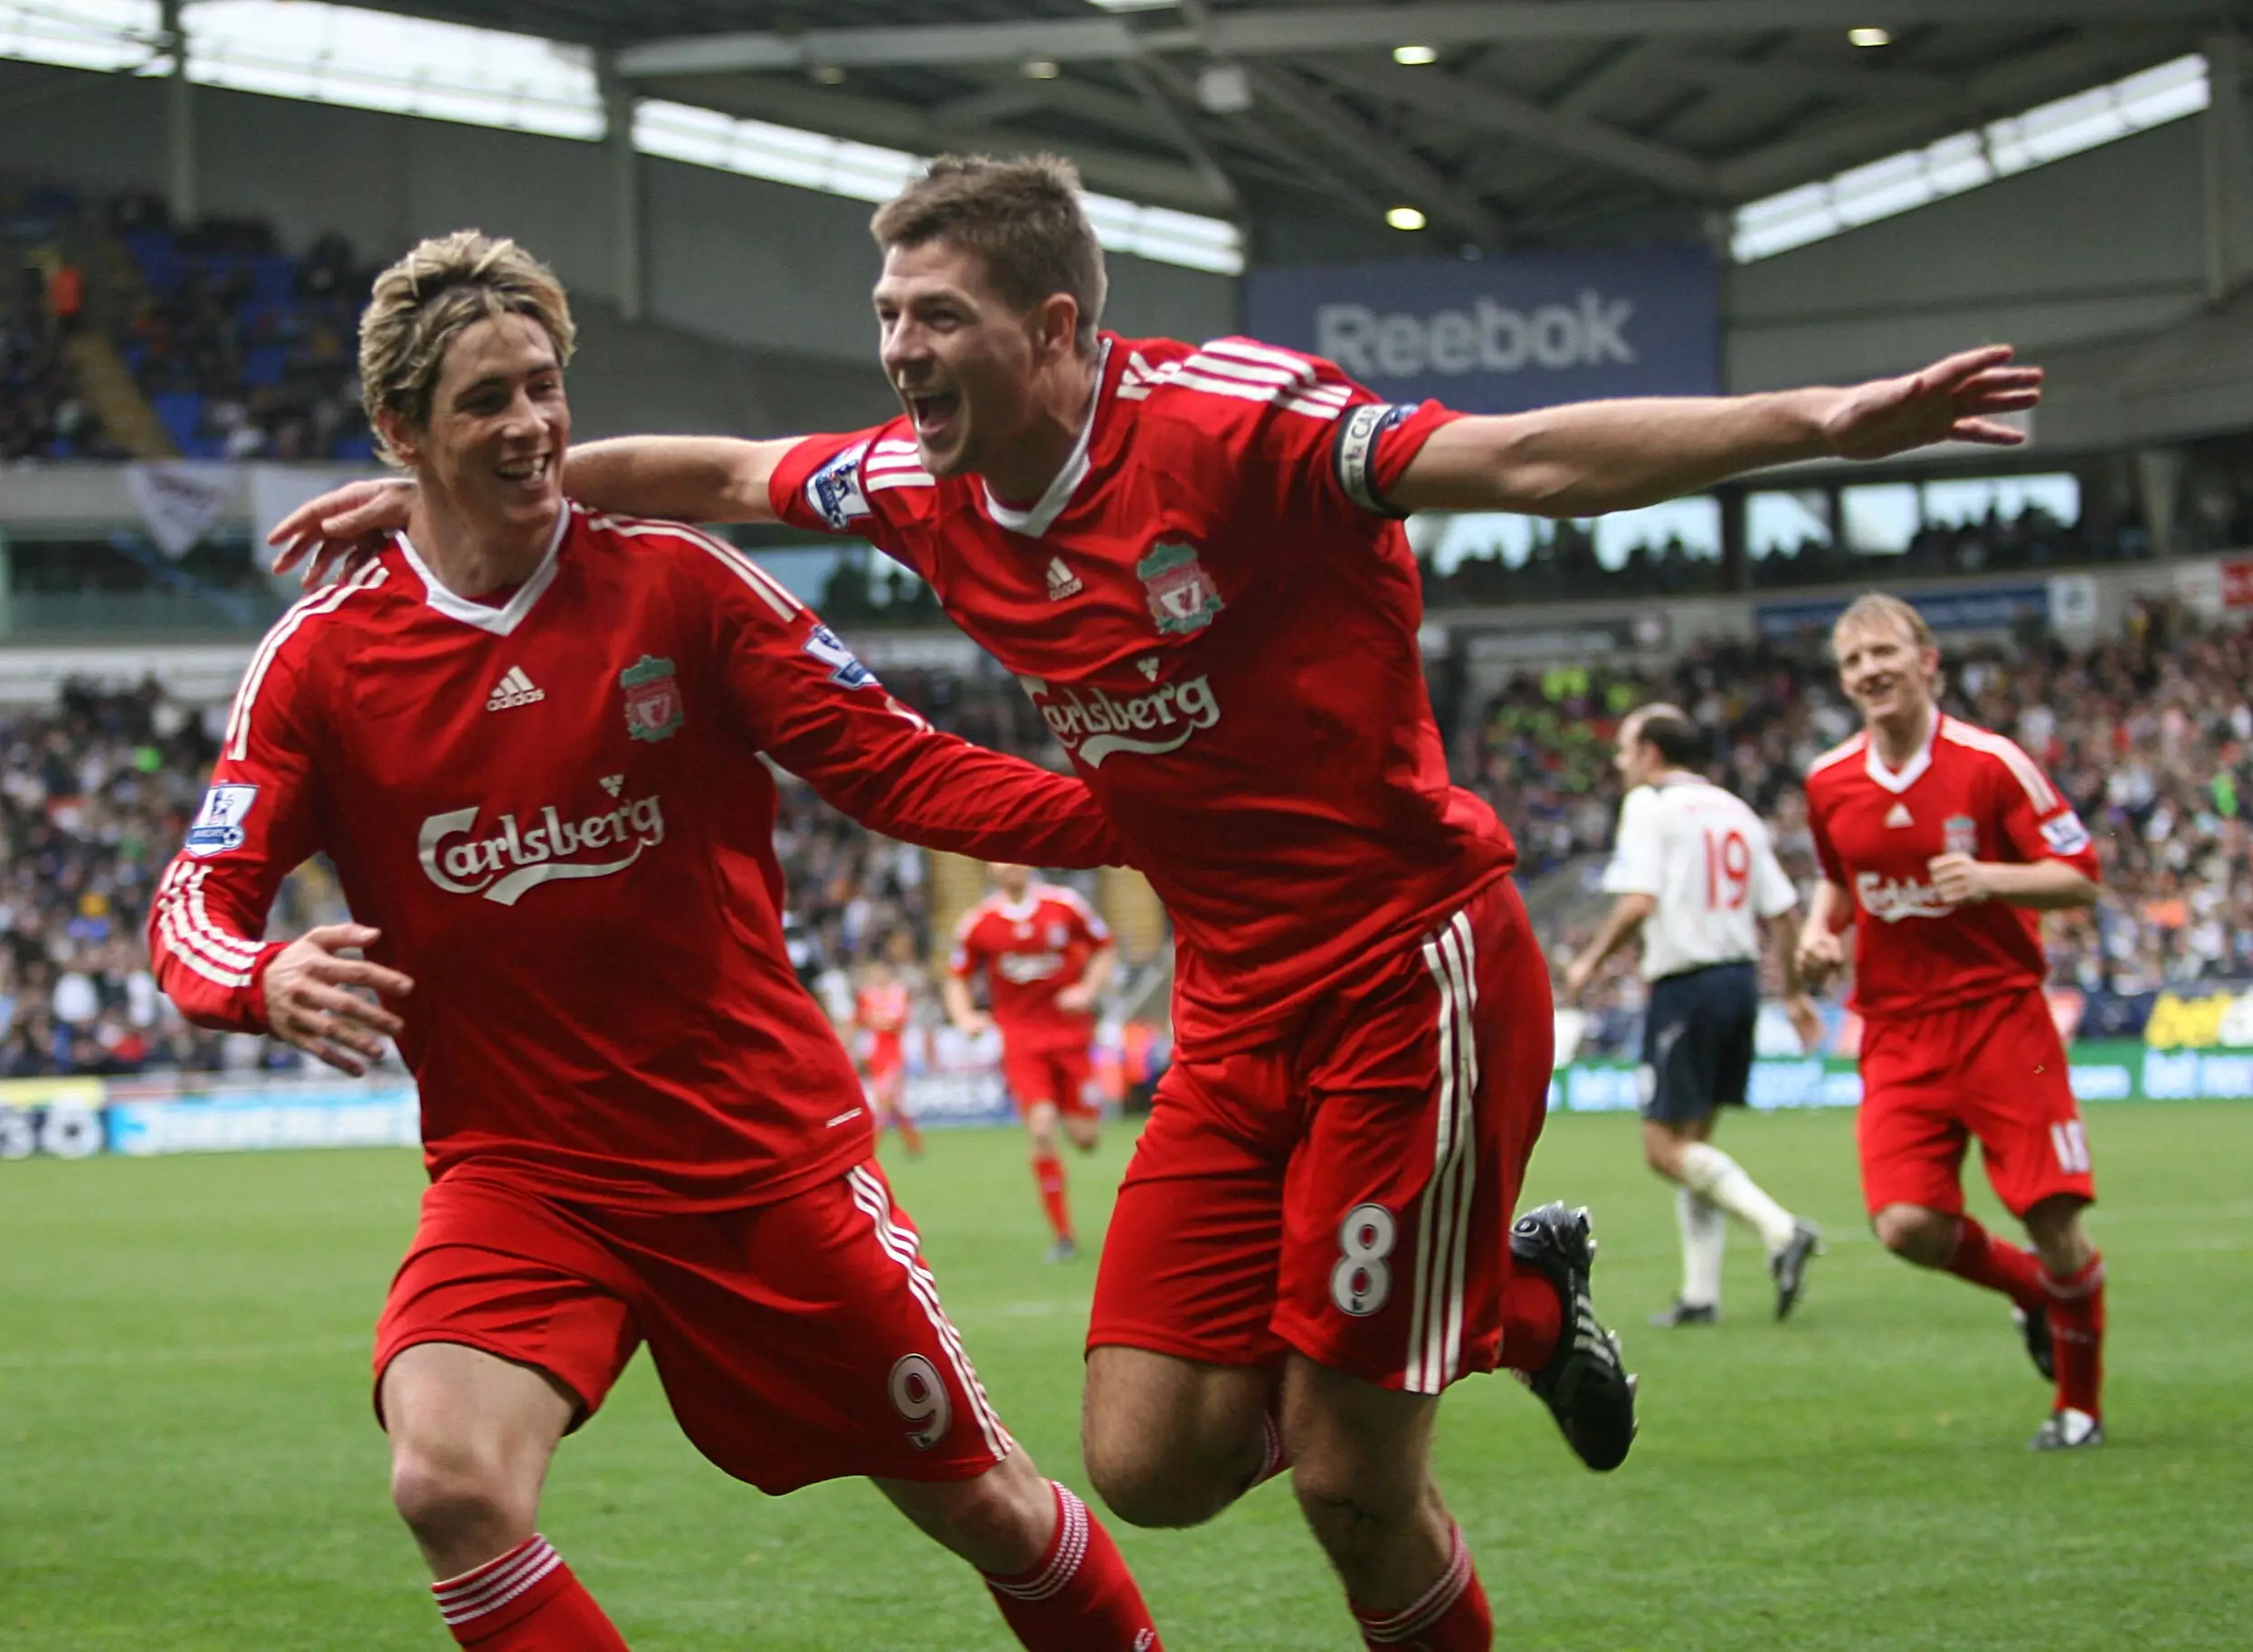 Gerrard and Torres had a great partnership. Image: PA Images